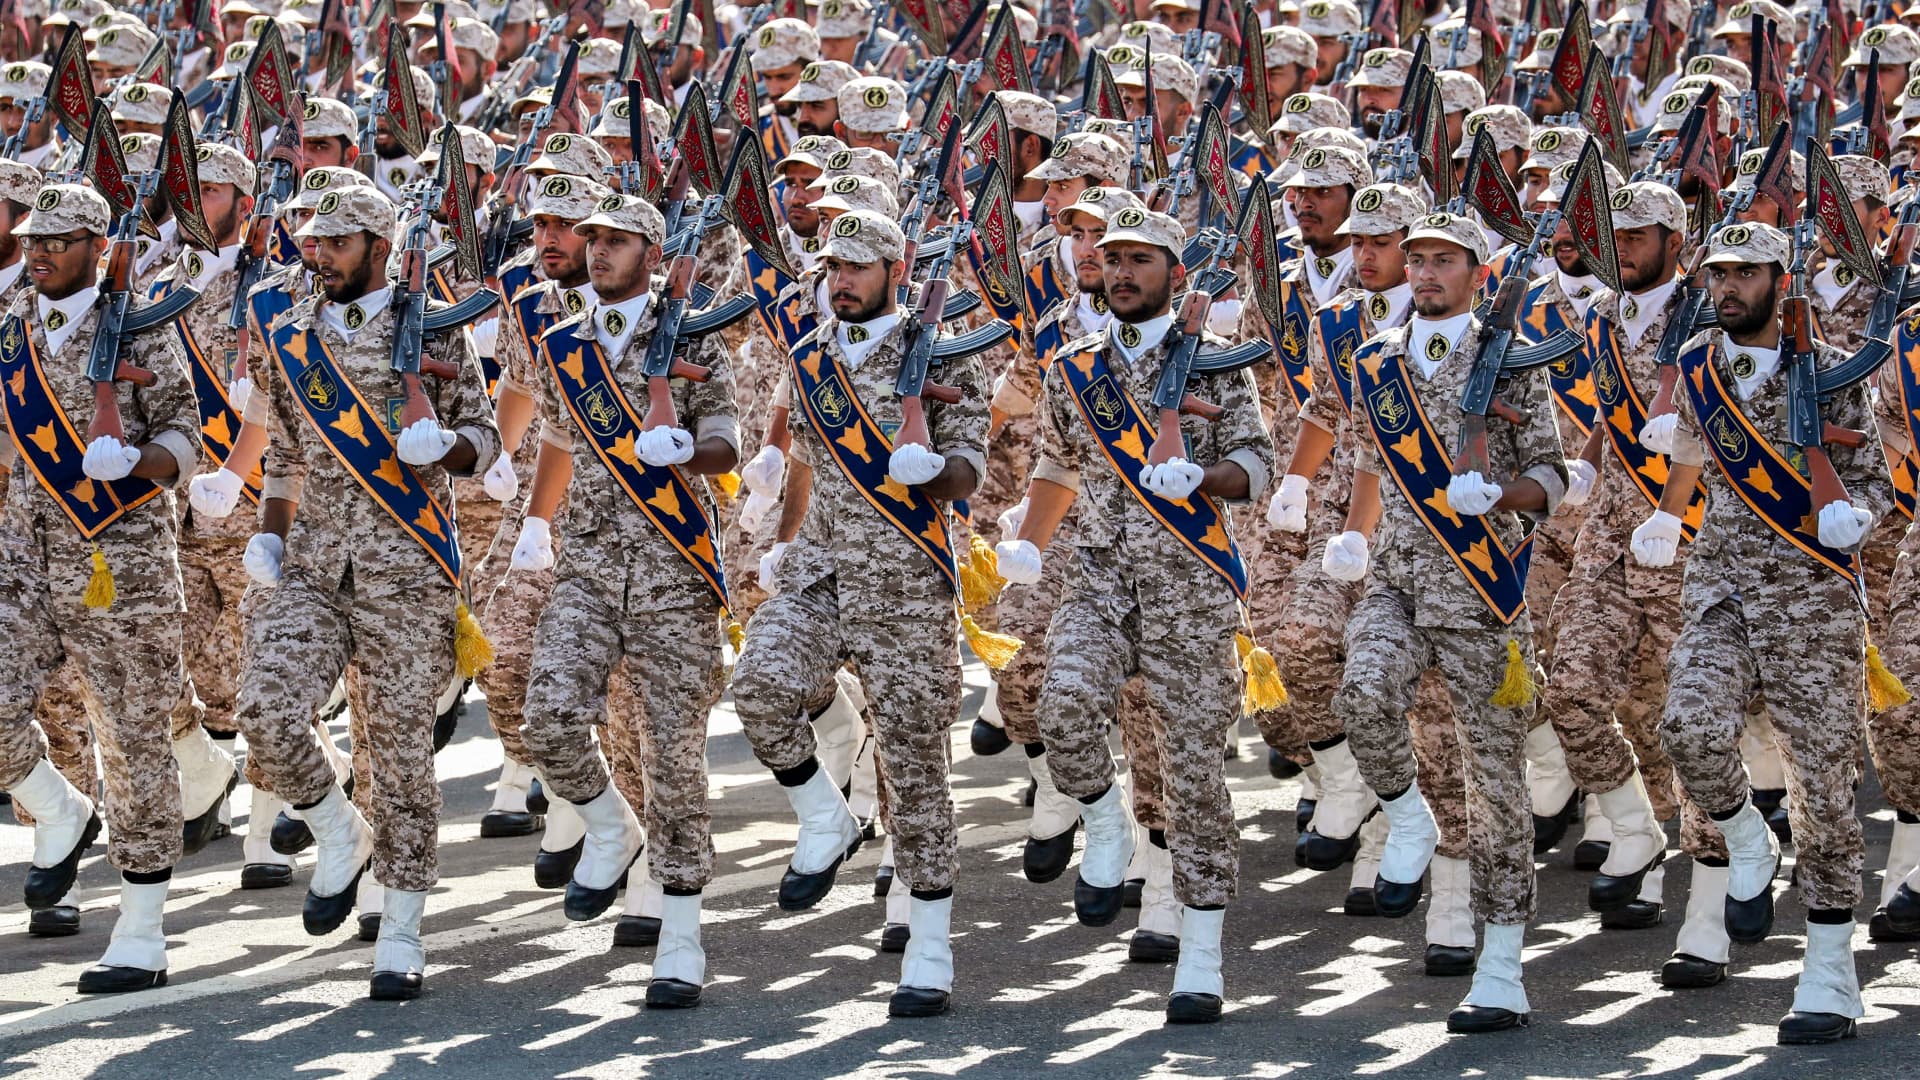 Members of Iran's Revolutionary Guards Corps (IRGC) march during the annual military parade In Iran's southwestern city of Ahvaz before the attack.